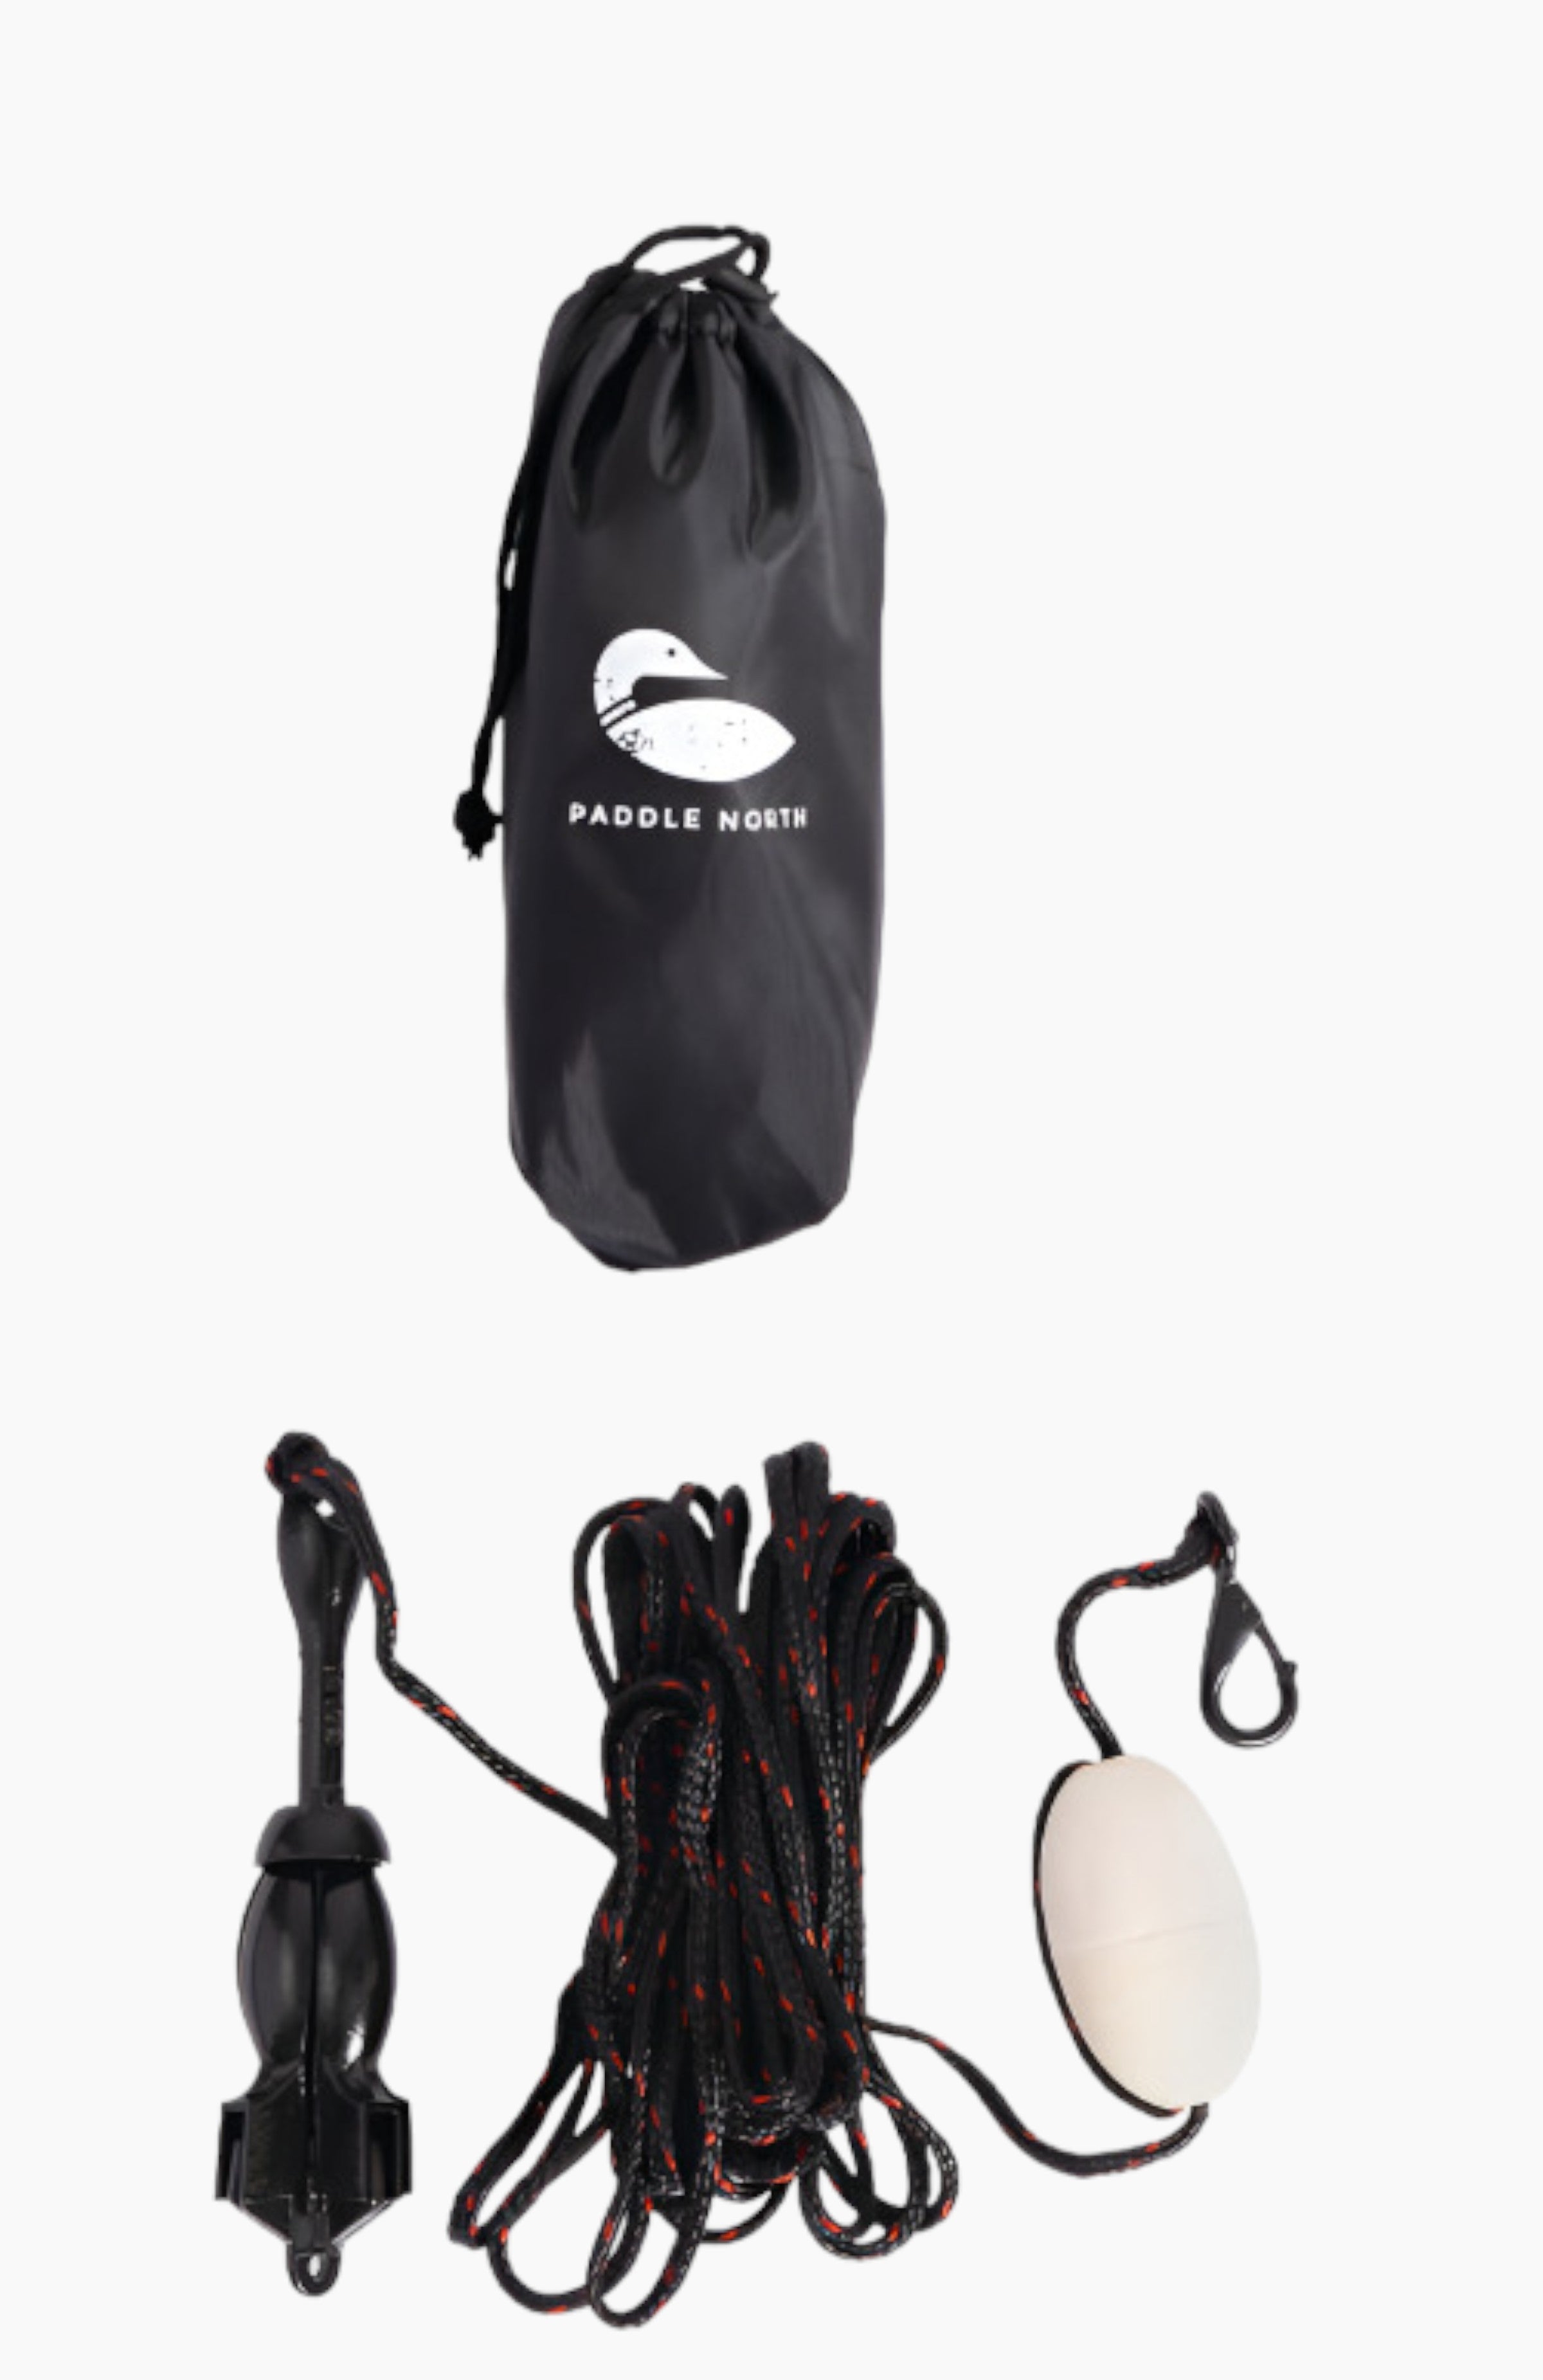 Paddle board and kayak accessories: water anchor with 40' long rope and black carrying case.